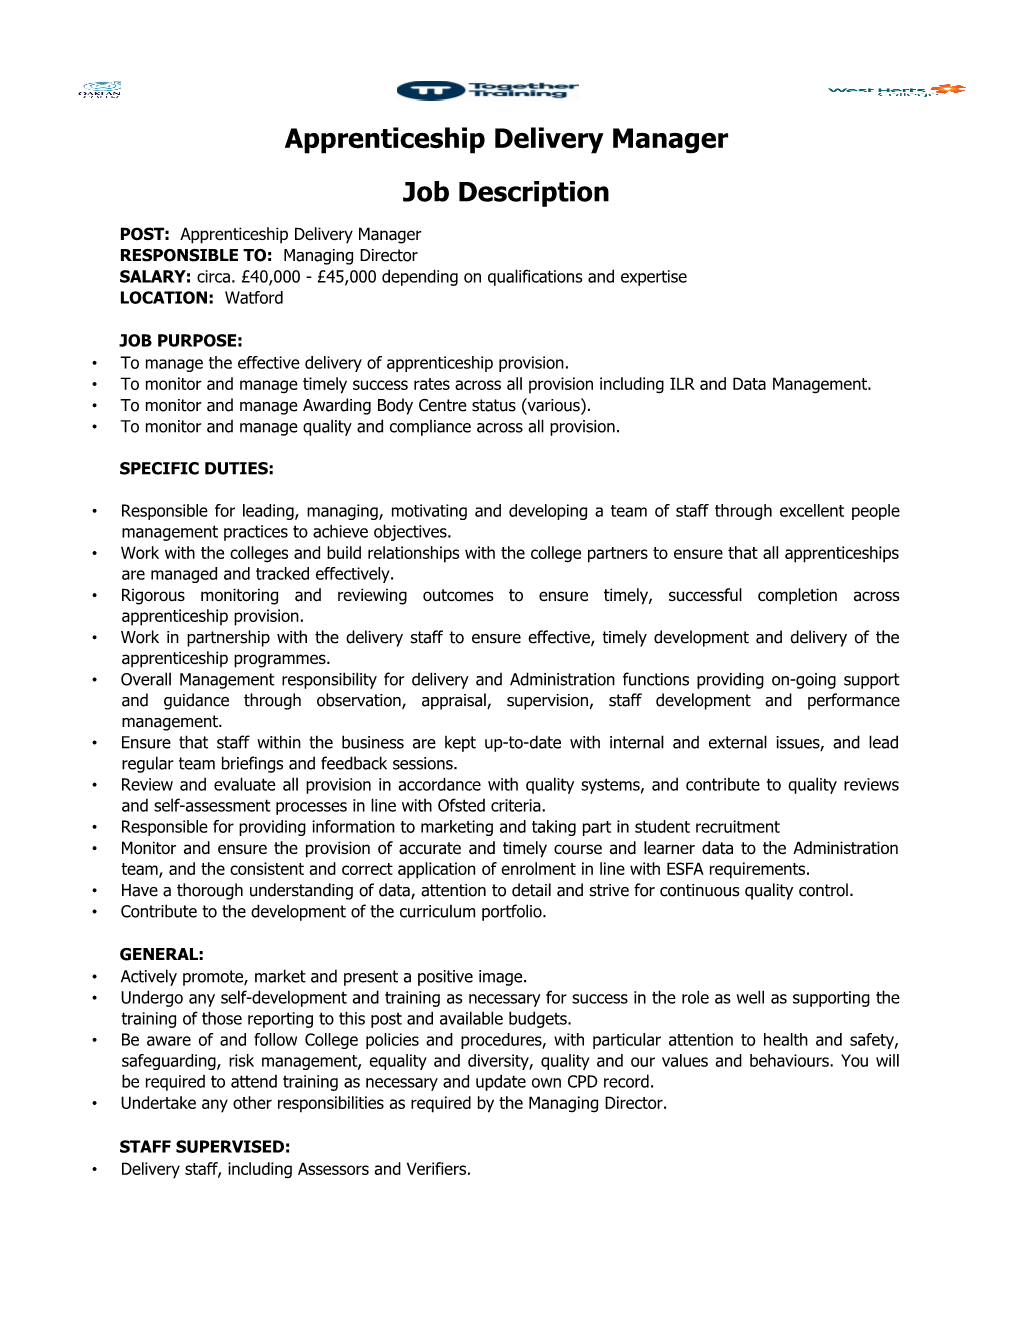 Apprenticeship Delivery Manager